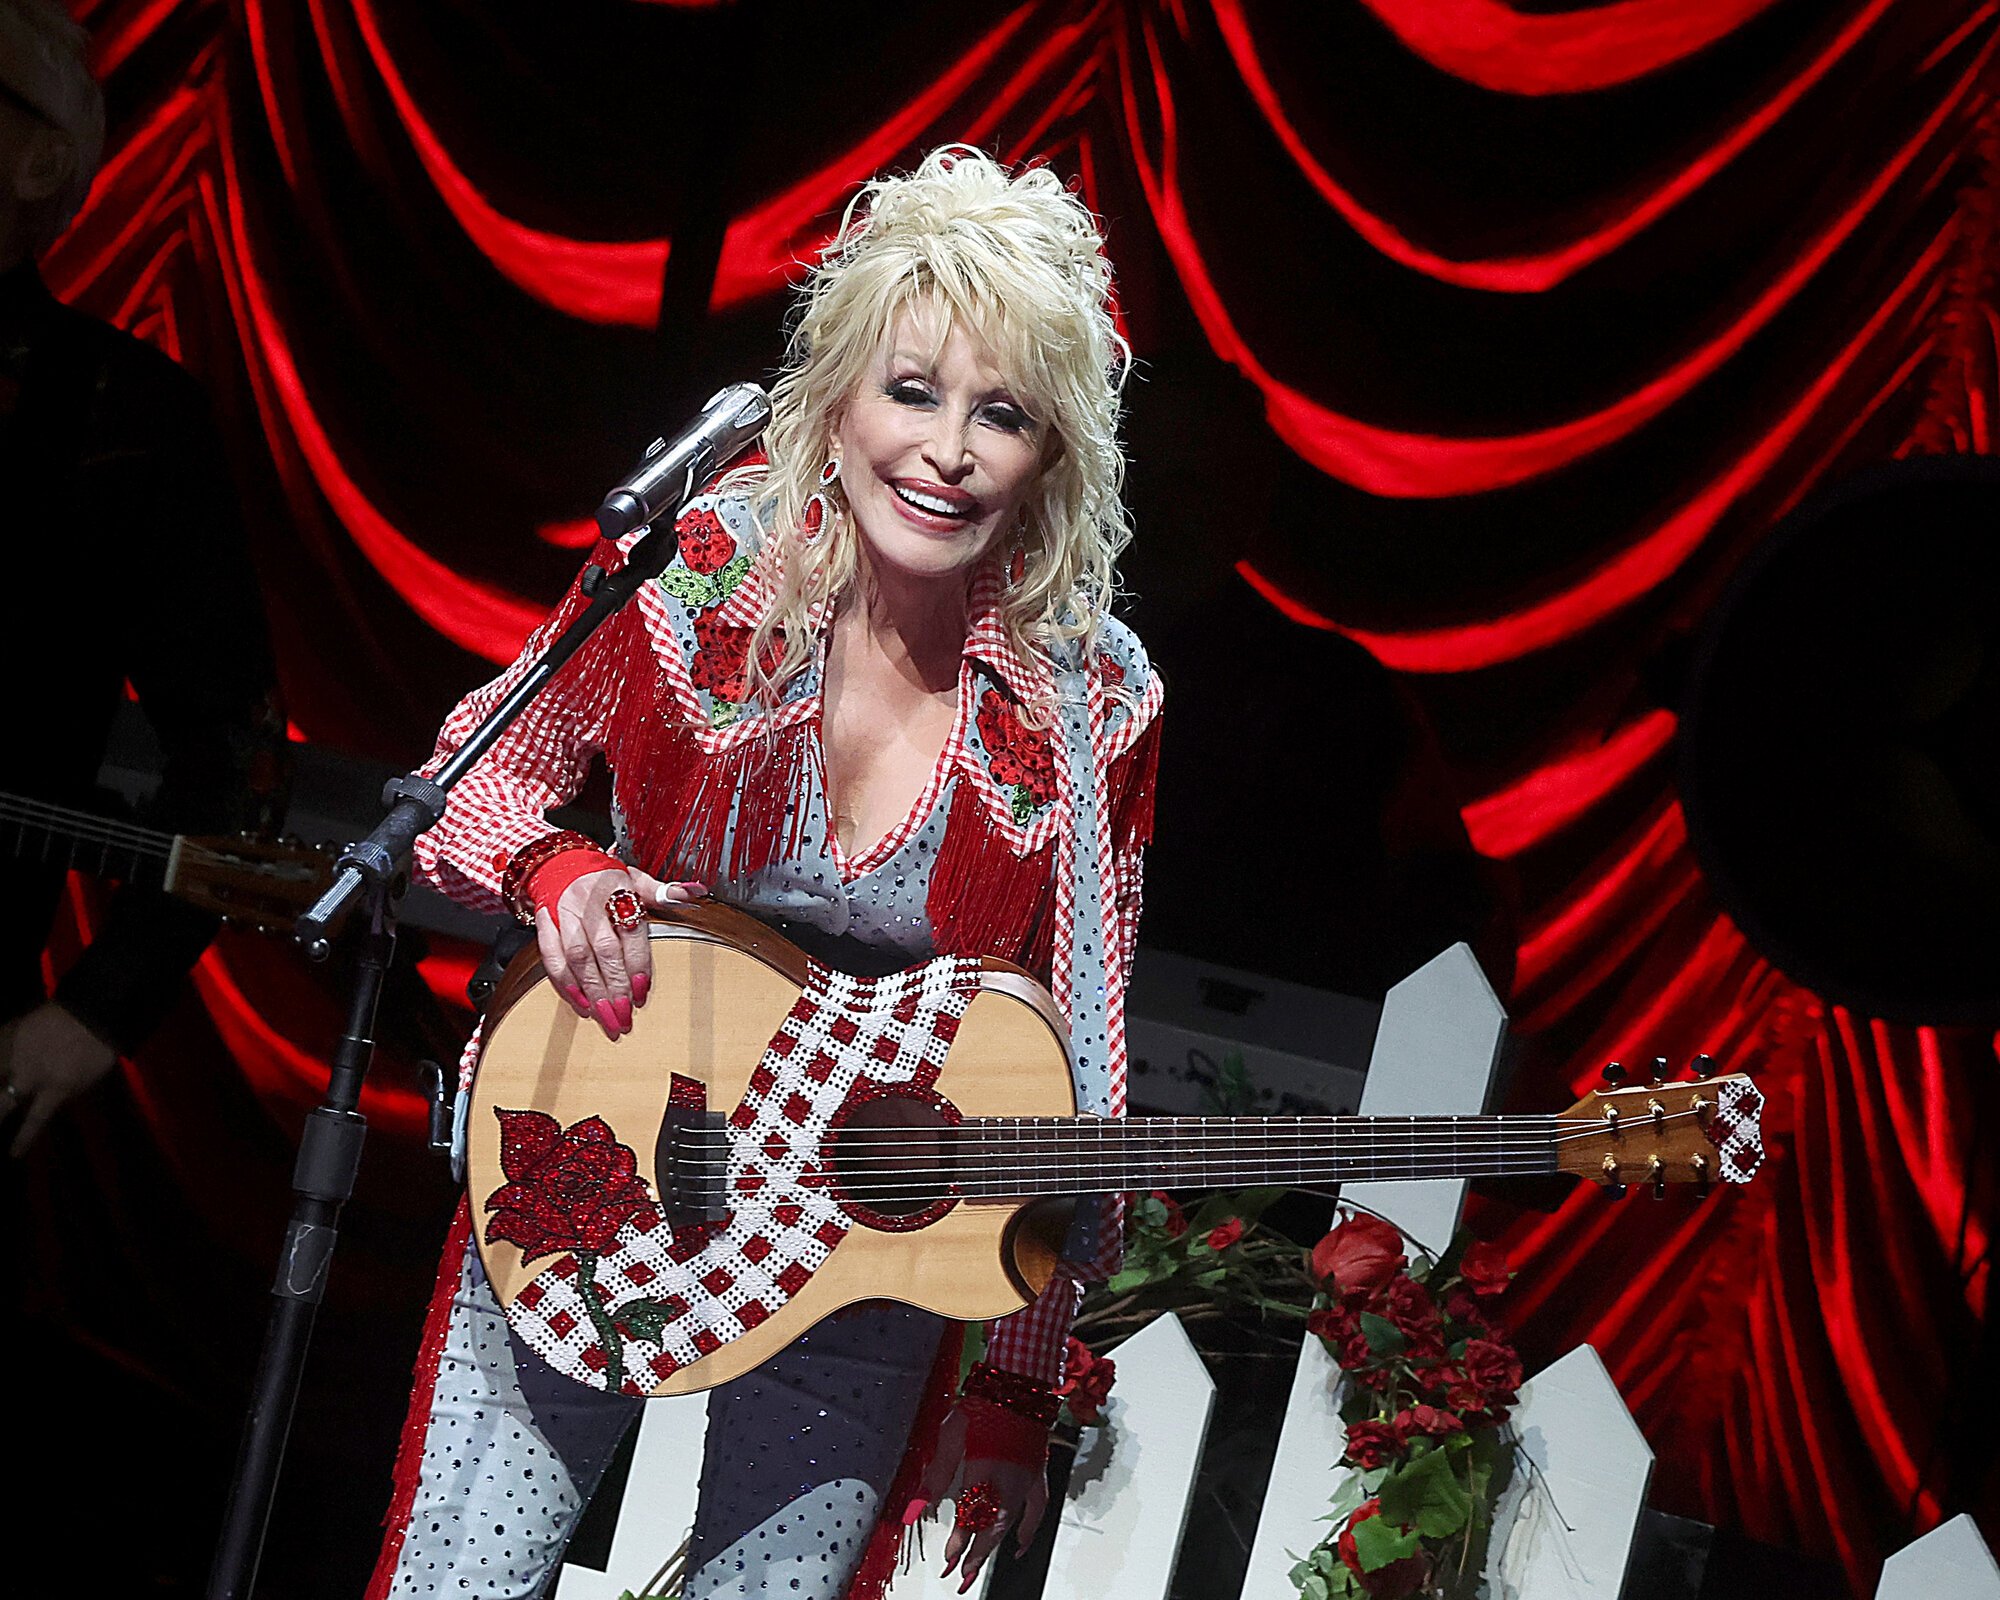 Dolly Parton, new Rock & Roll Hall of Fame inductee, performing on stage with guitar in hand.